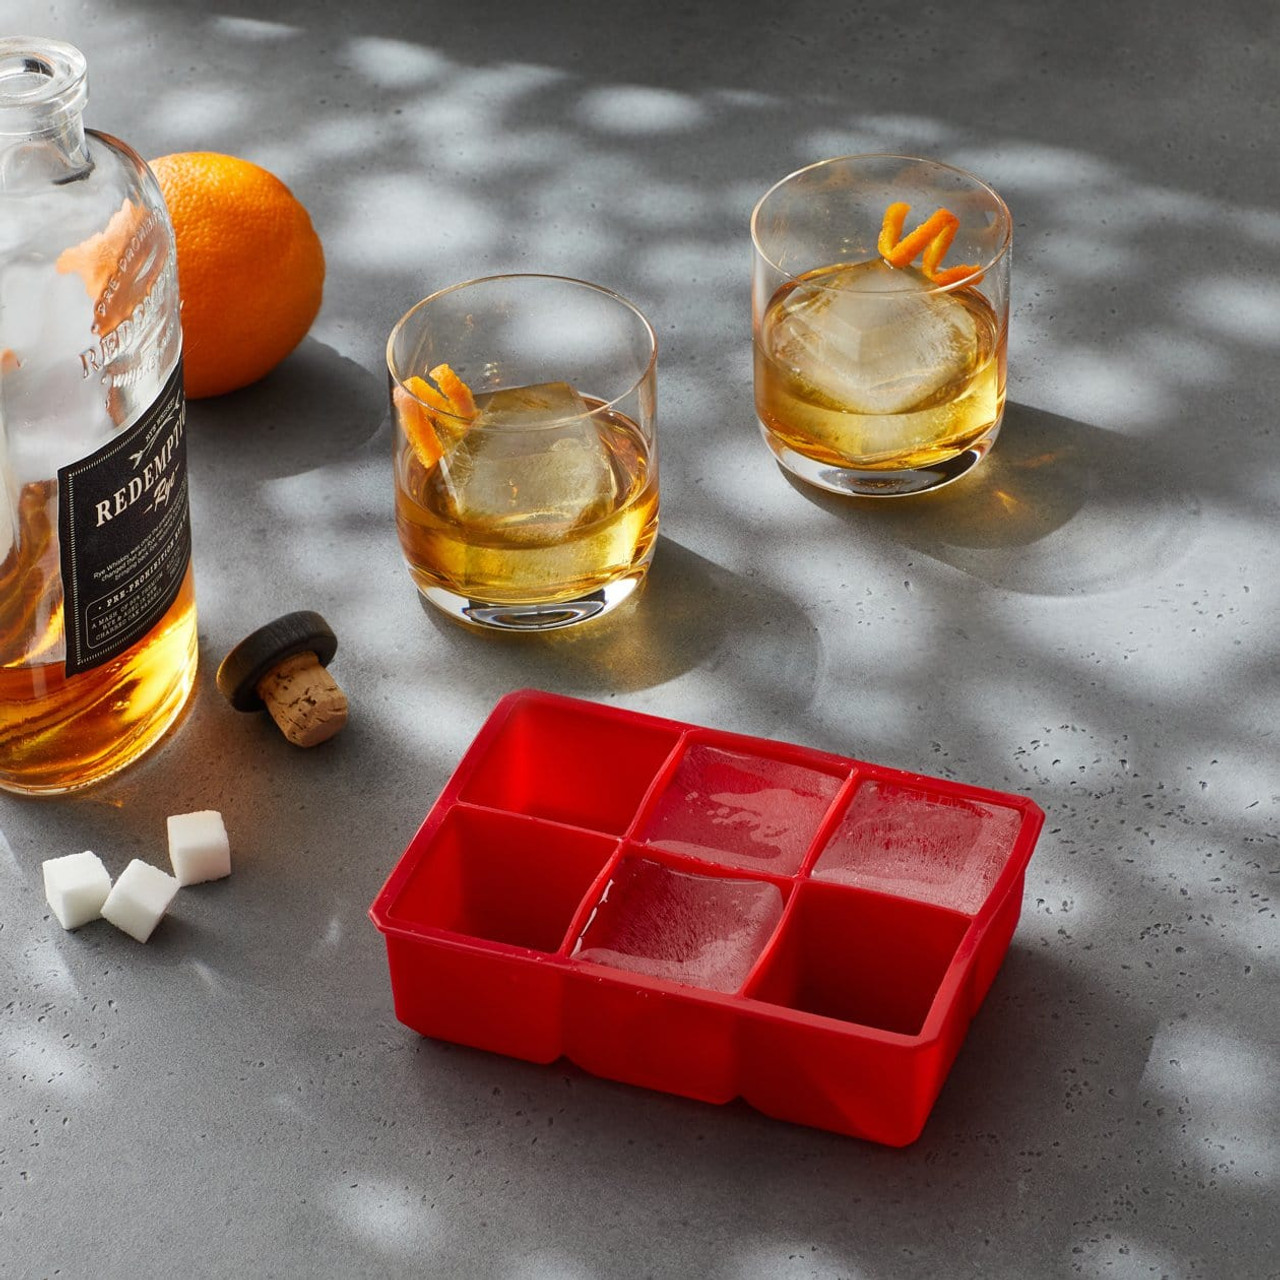 HIC Ice Ball Tray 10 1.5 Spheres - Fante's Kitchen Shop - Since 1906